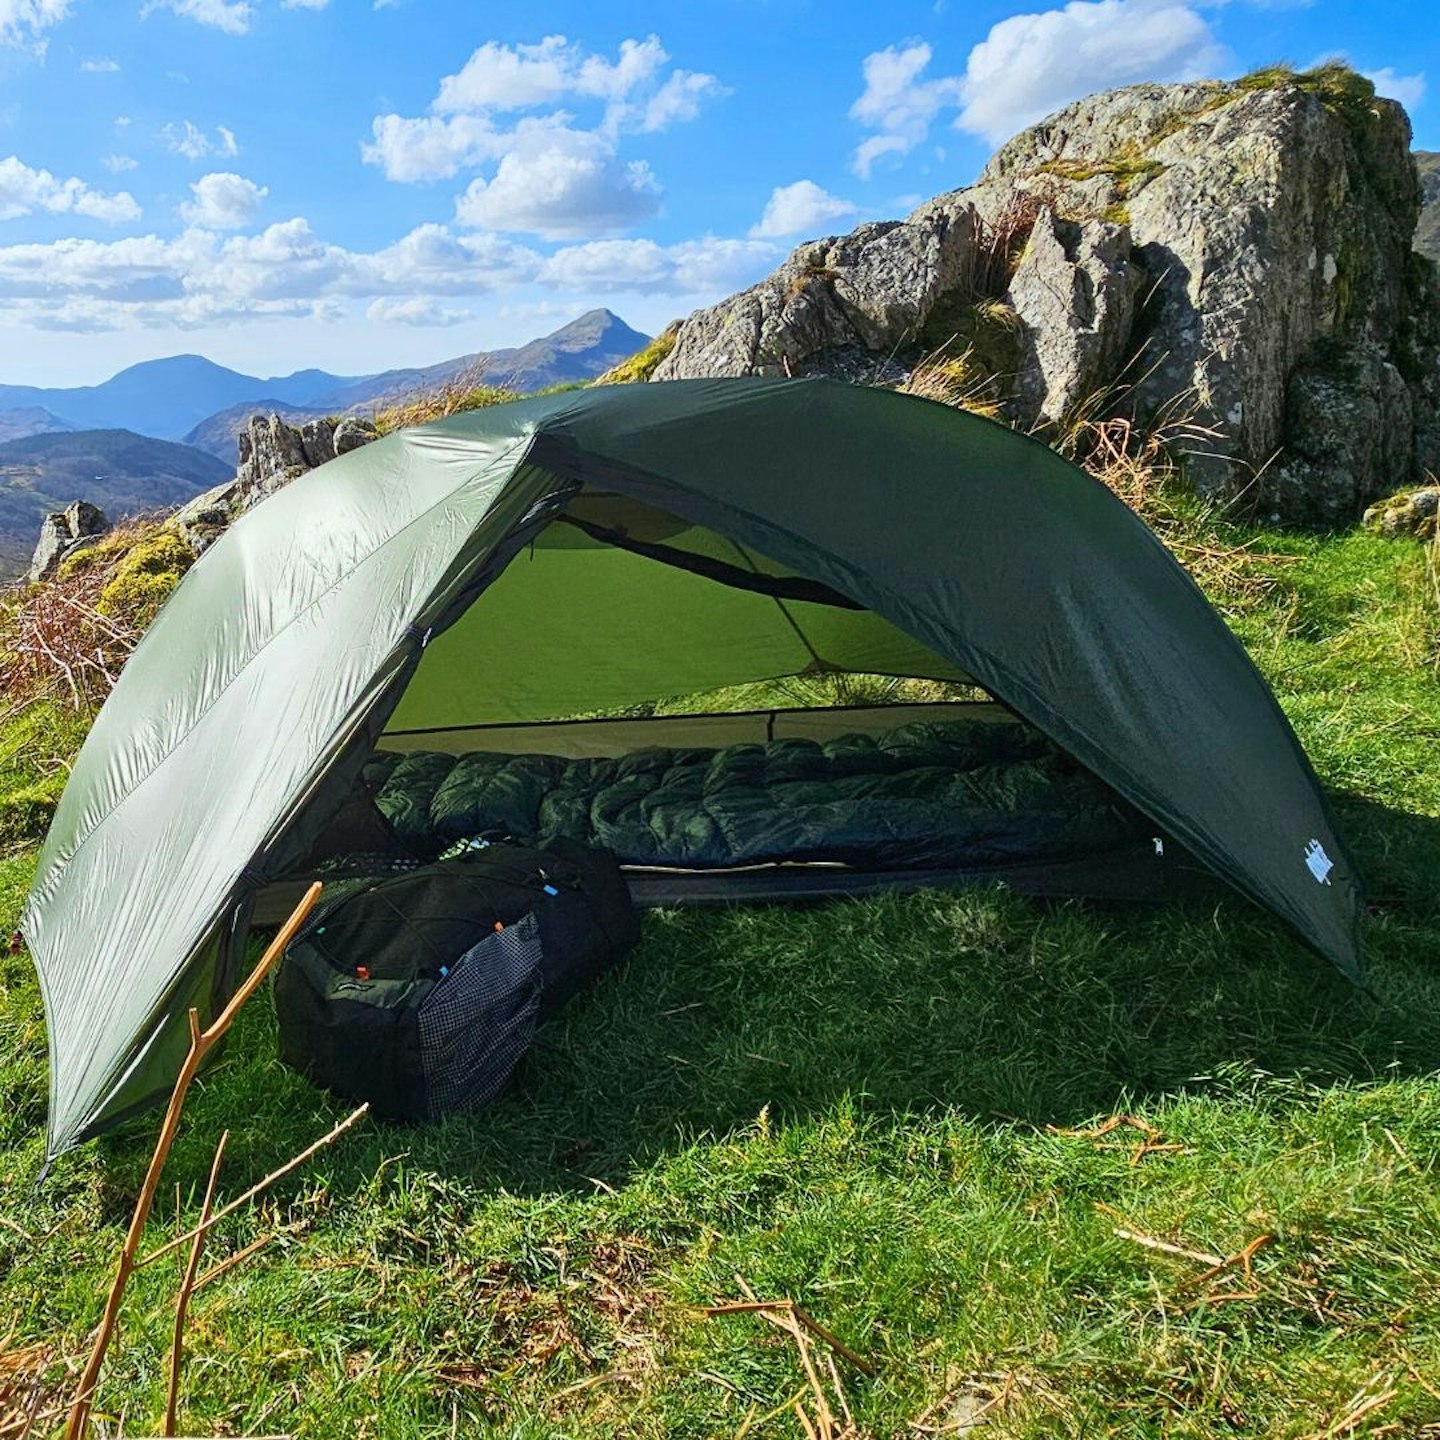 Alpkit Ultra 1 Tent pitched with door open